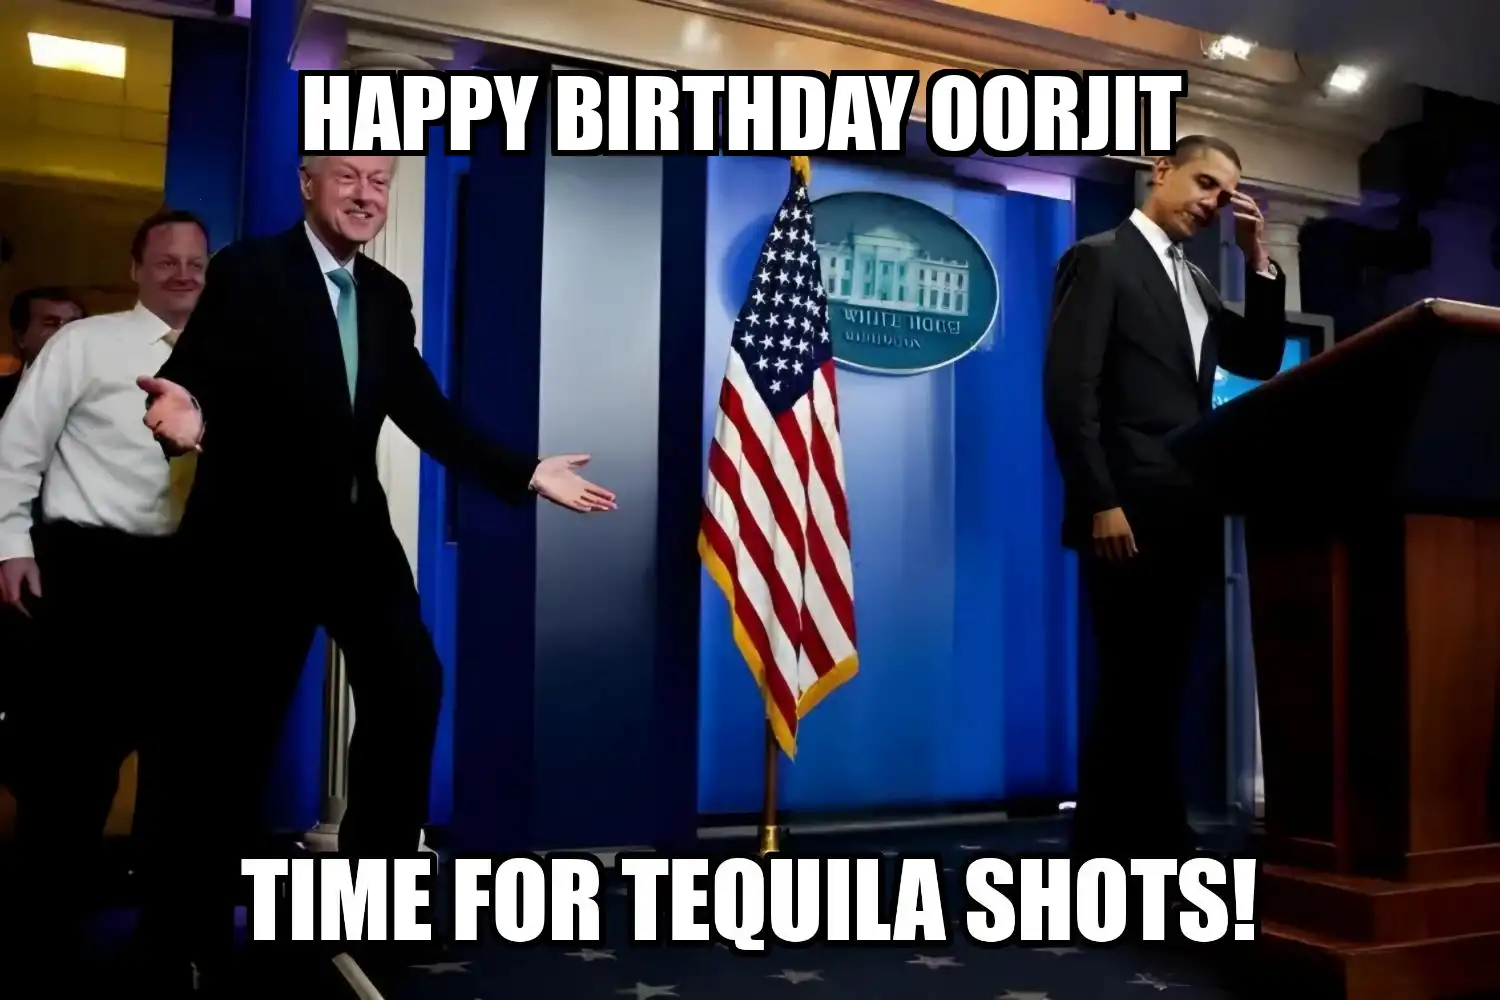 Happy Birthday Oorjit Time For Tequila Shots Memes